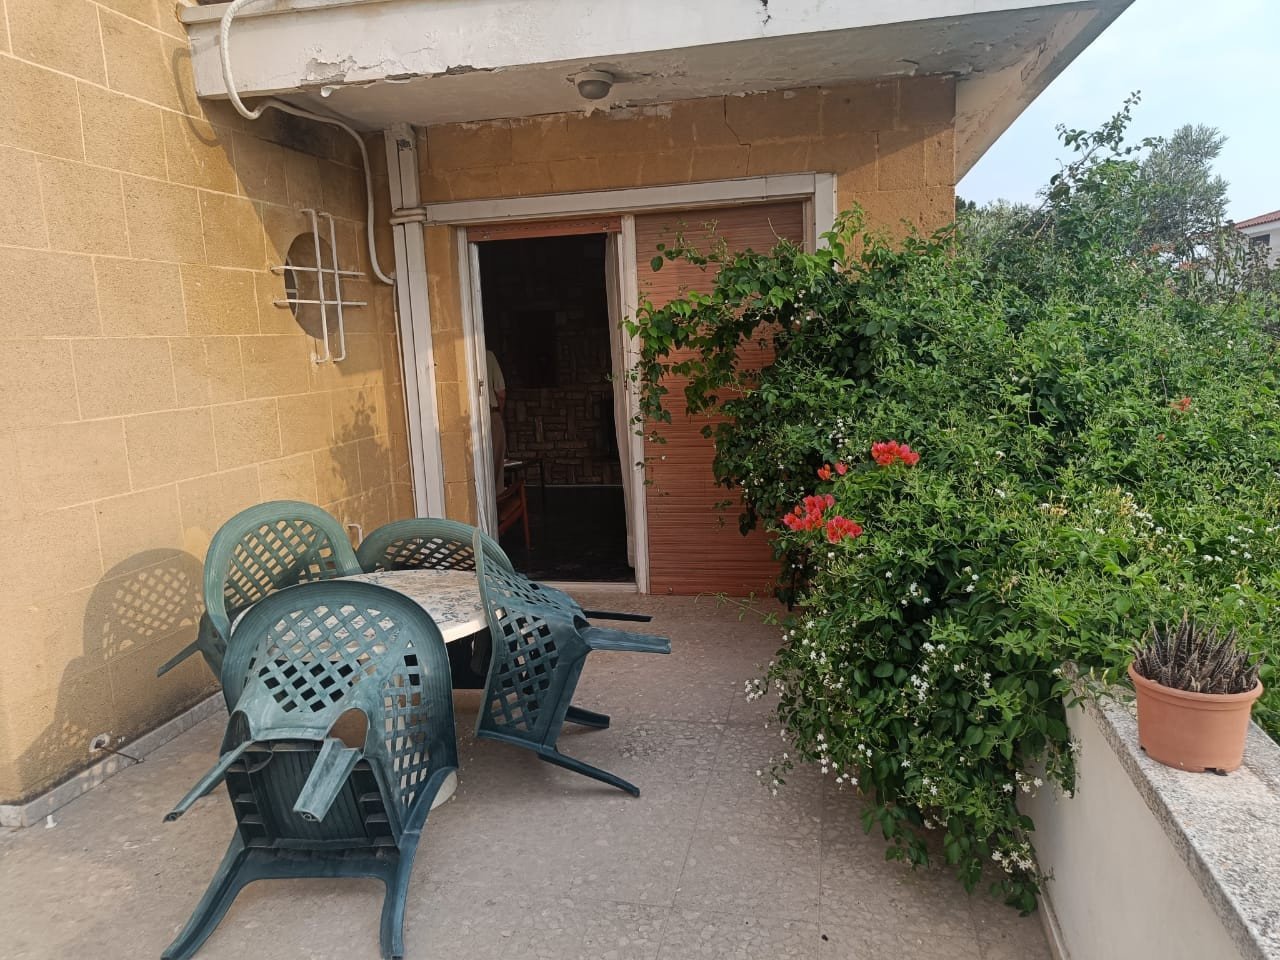 For Rent: Apartments, Agios Andreas, Nicosia, Cyprus FC-38861 - #17